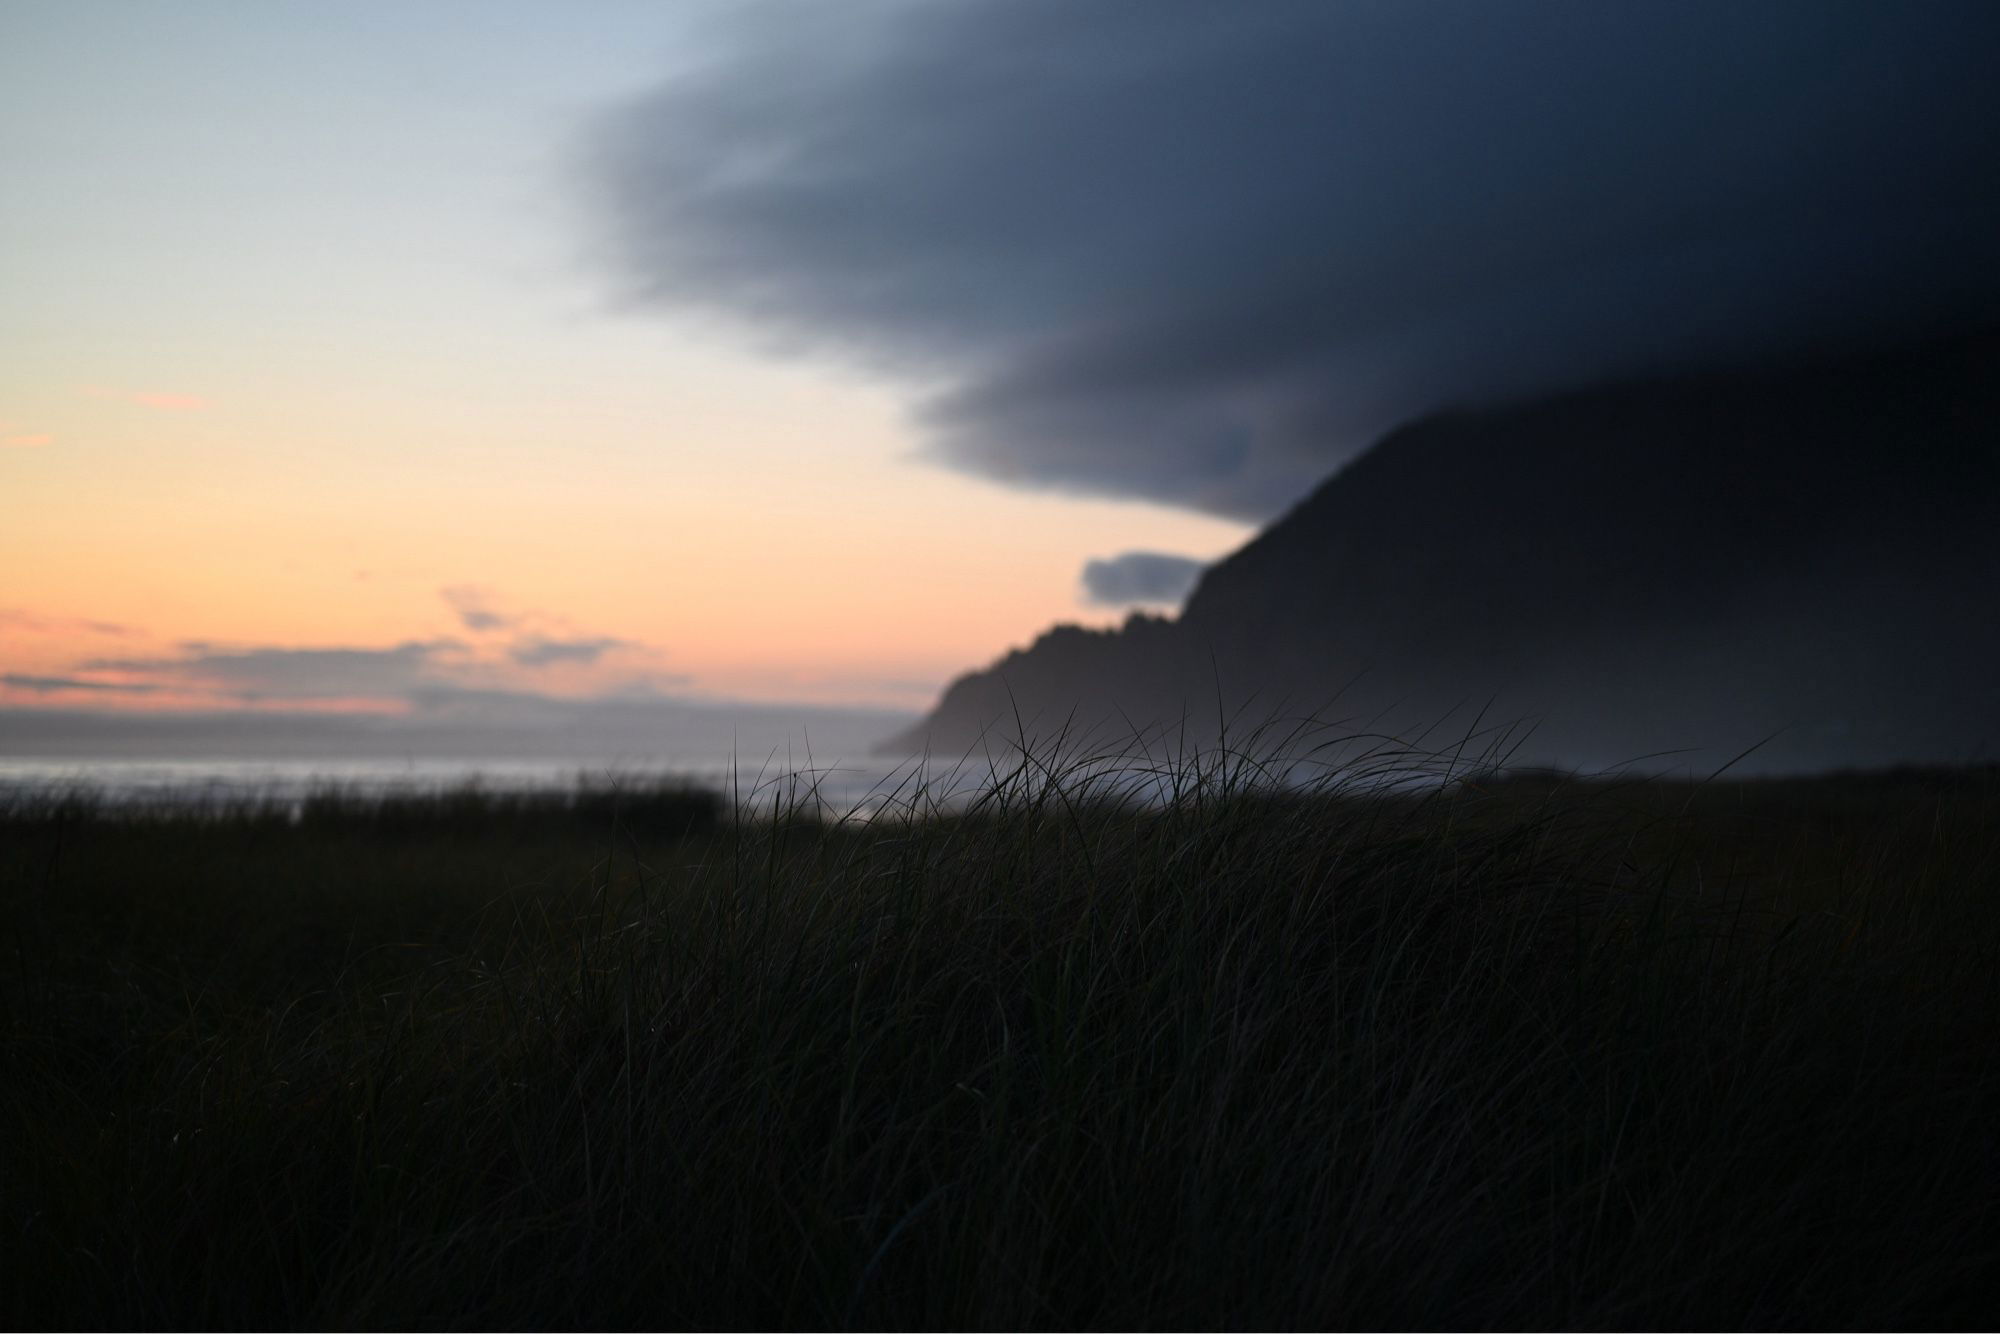 Coastal scene at dusk with tall grass in the foreground and a dark mountain silhouette against a pastel sky.